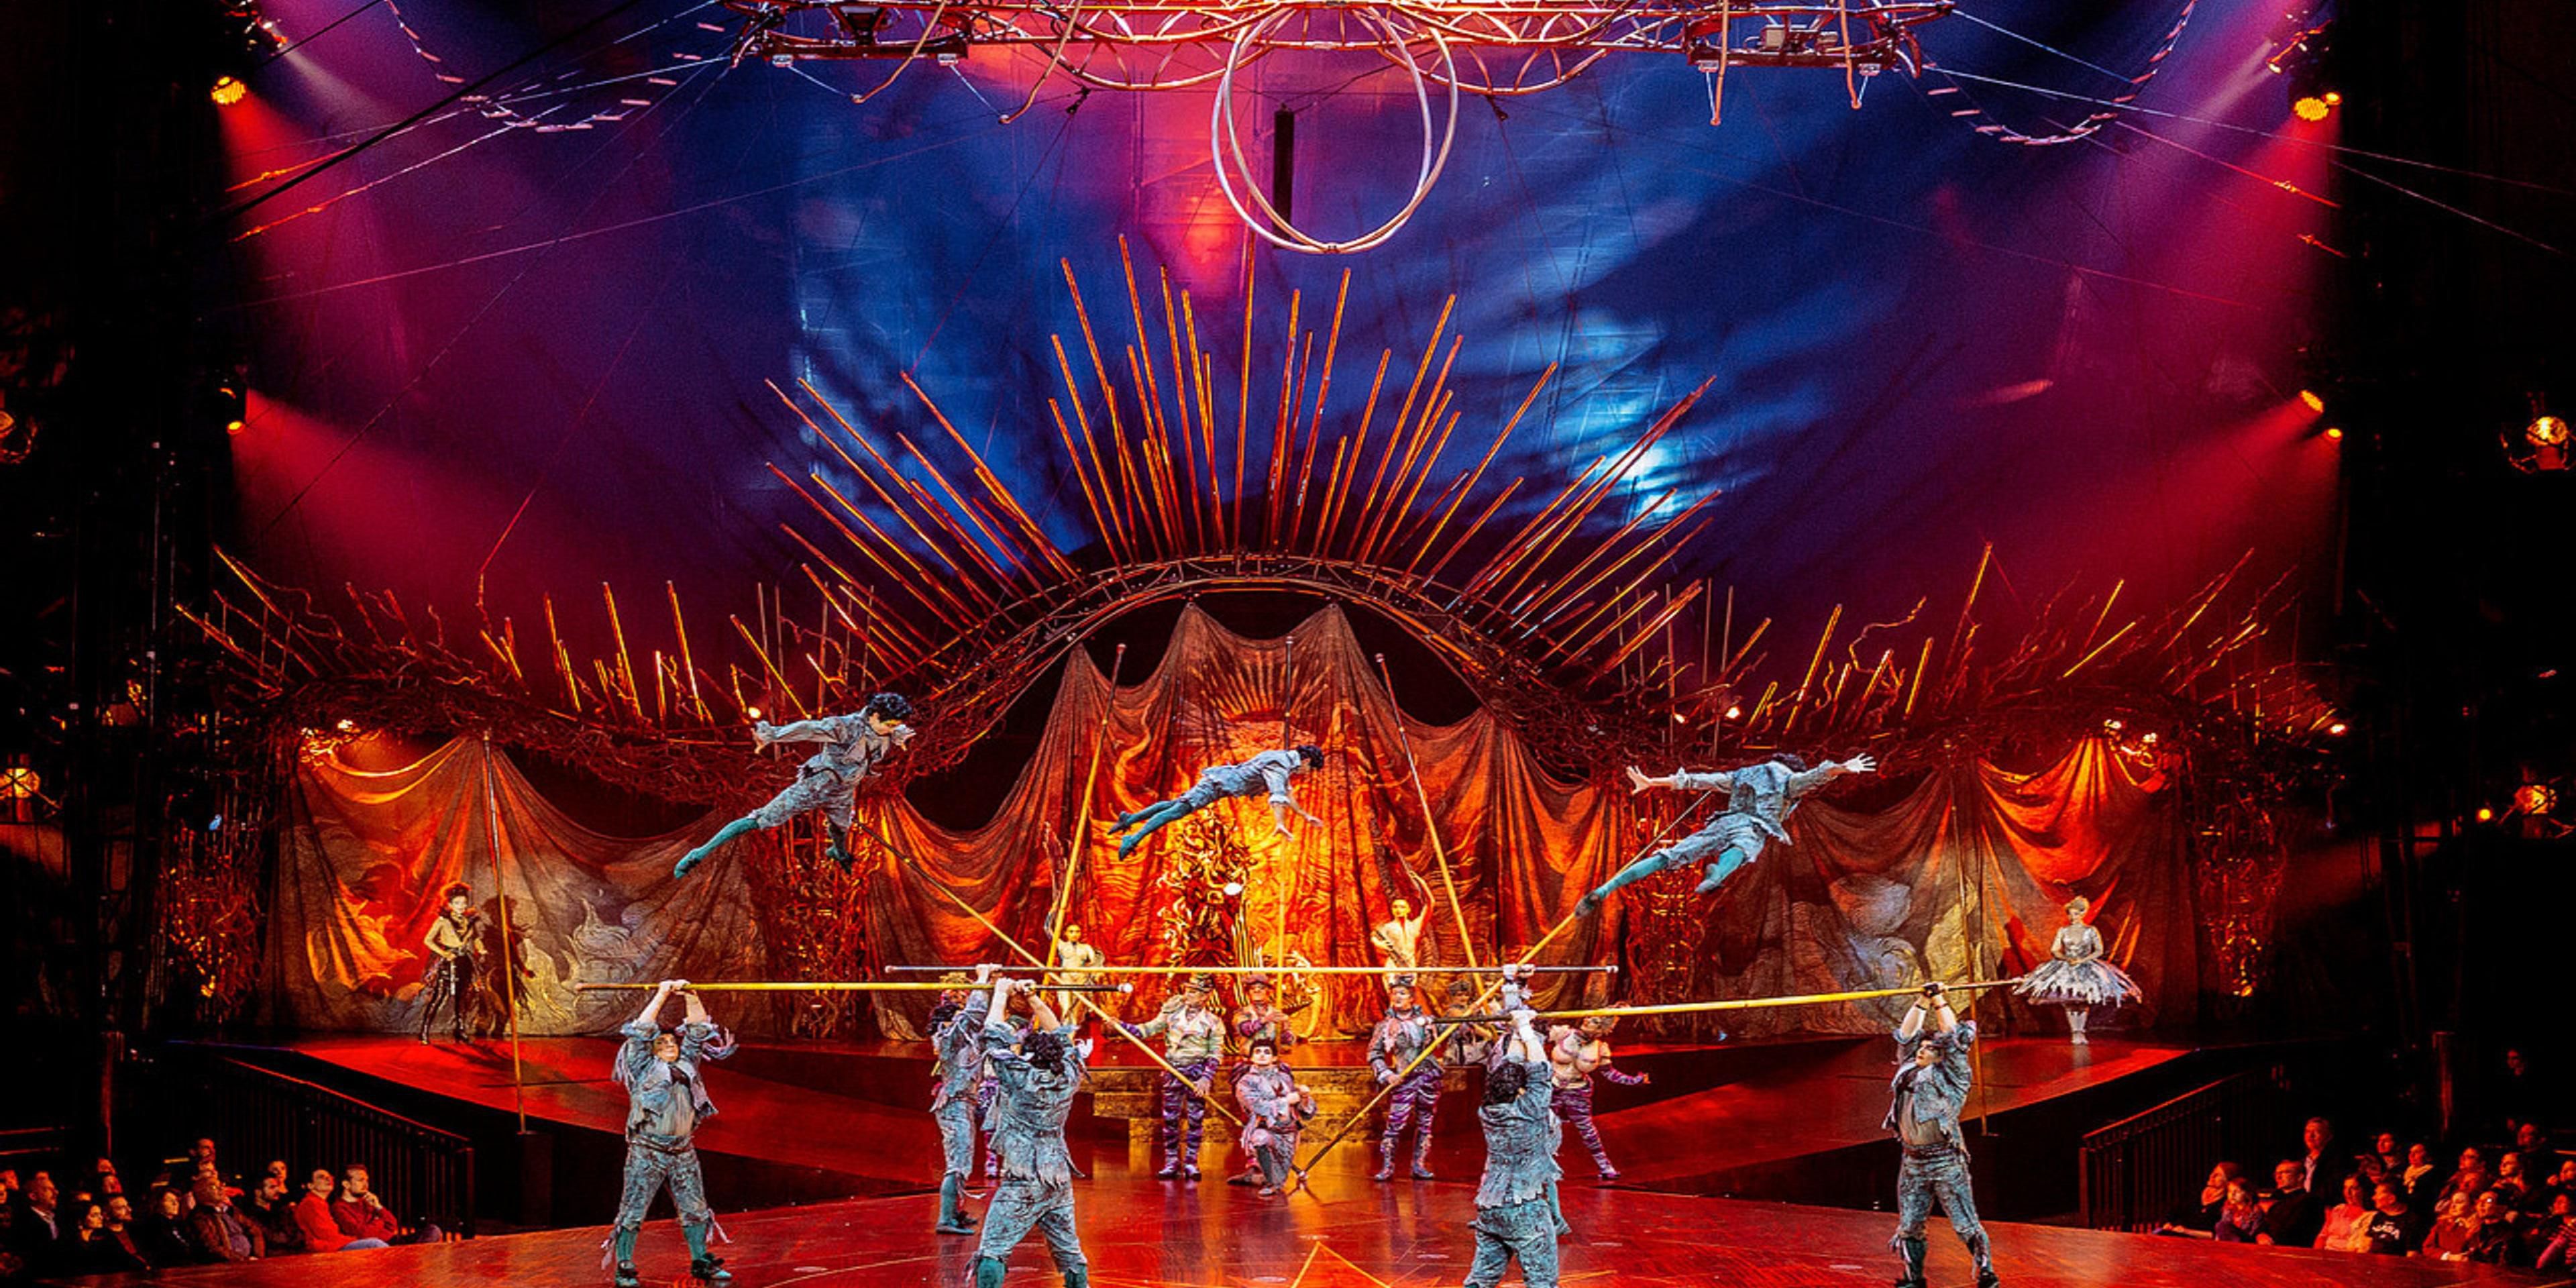 The Nouvelle Cirque Returns! Visit Cirque du Soleil's most acclaimed show, live at the specially constructed Grand Chapiteau at Sam Houston Race Park. 